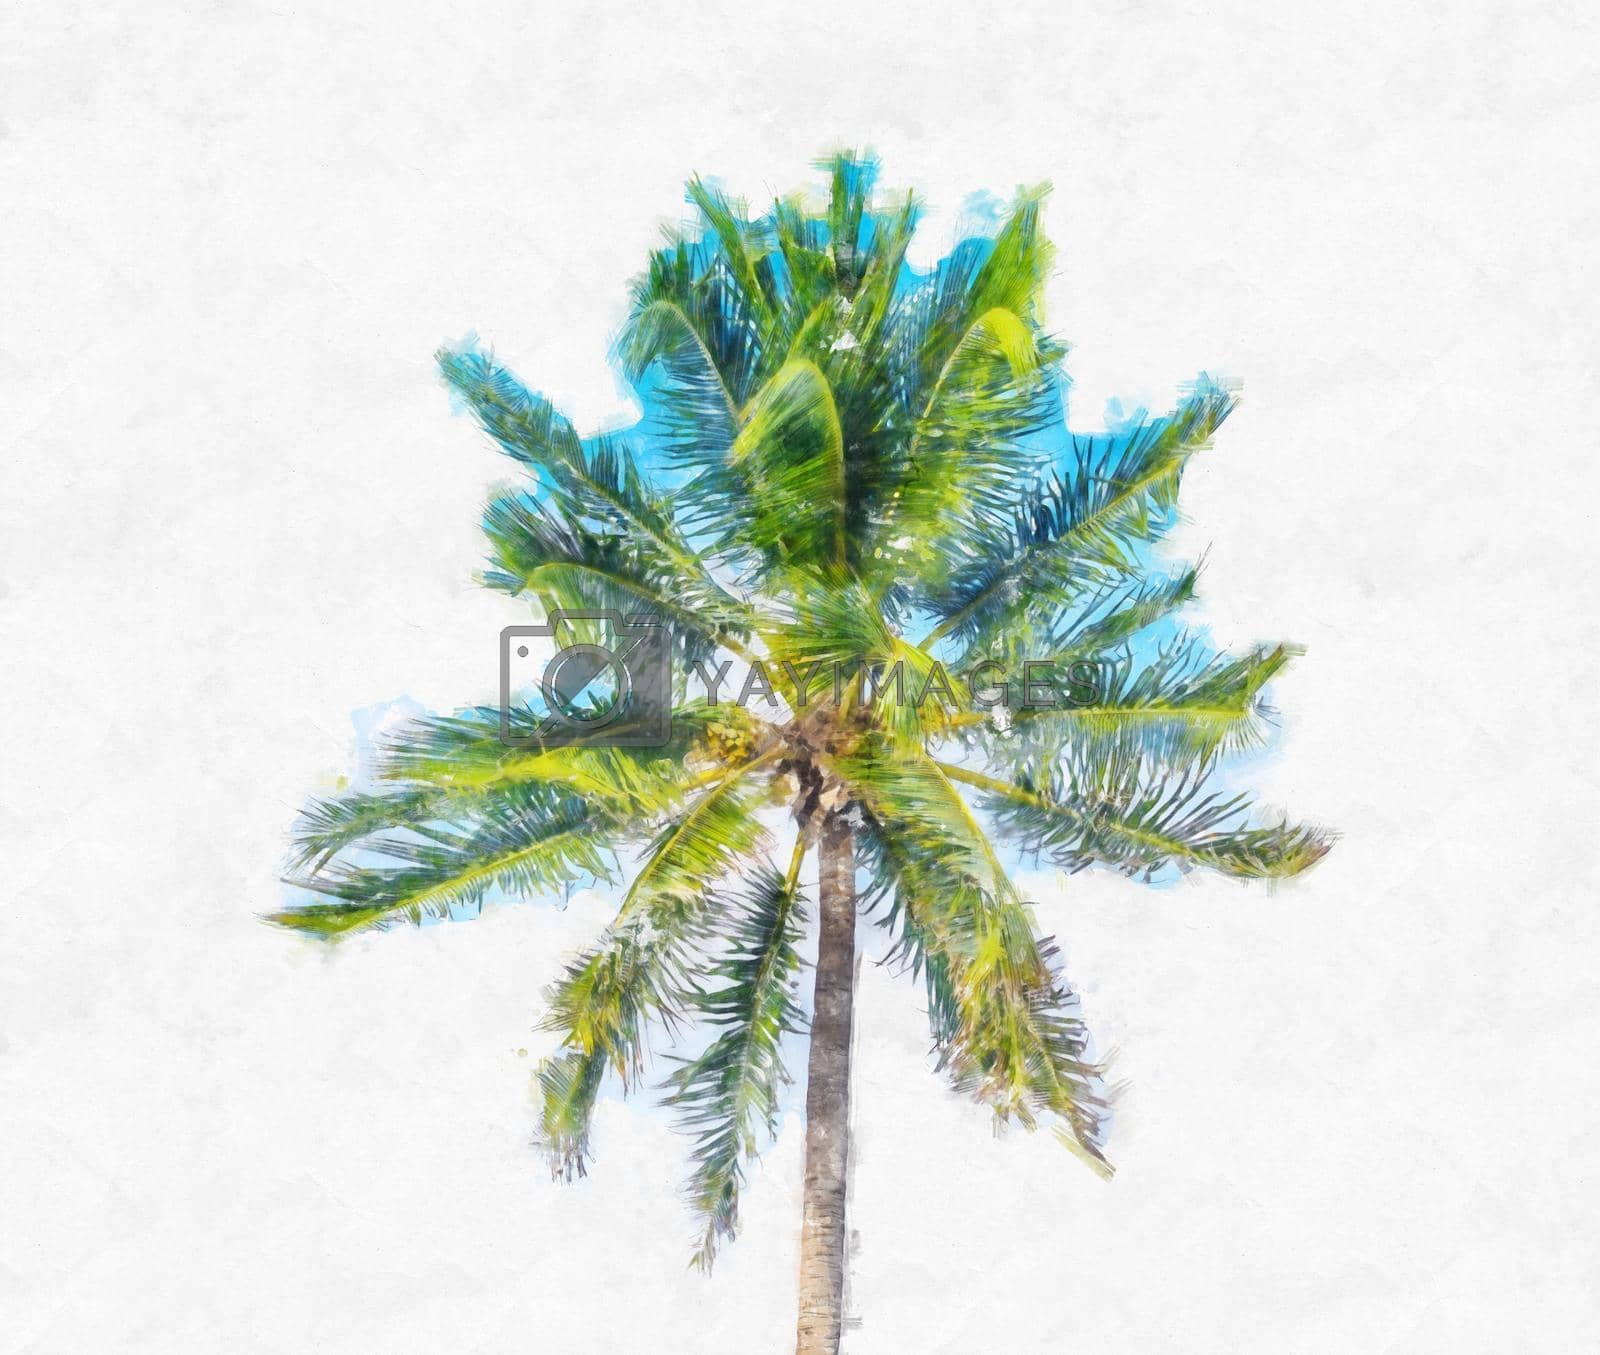 Watercolor painting illustration of One palm tree on blue sky with clouds